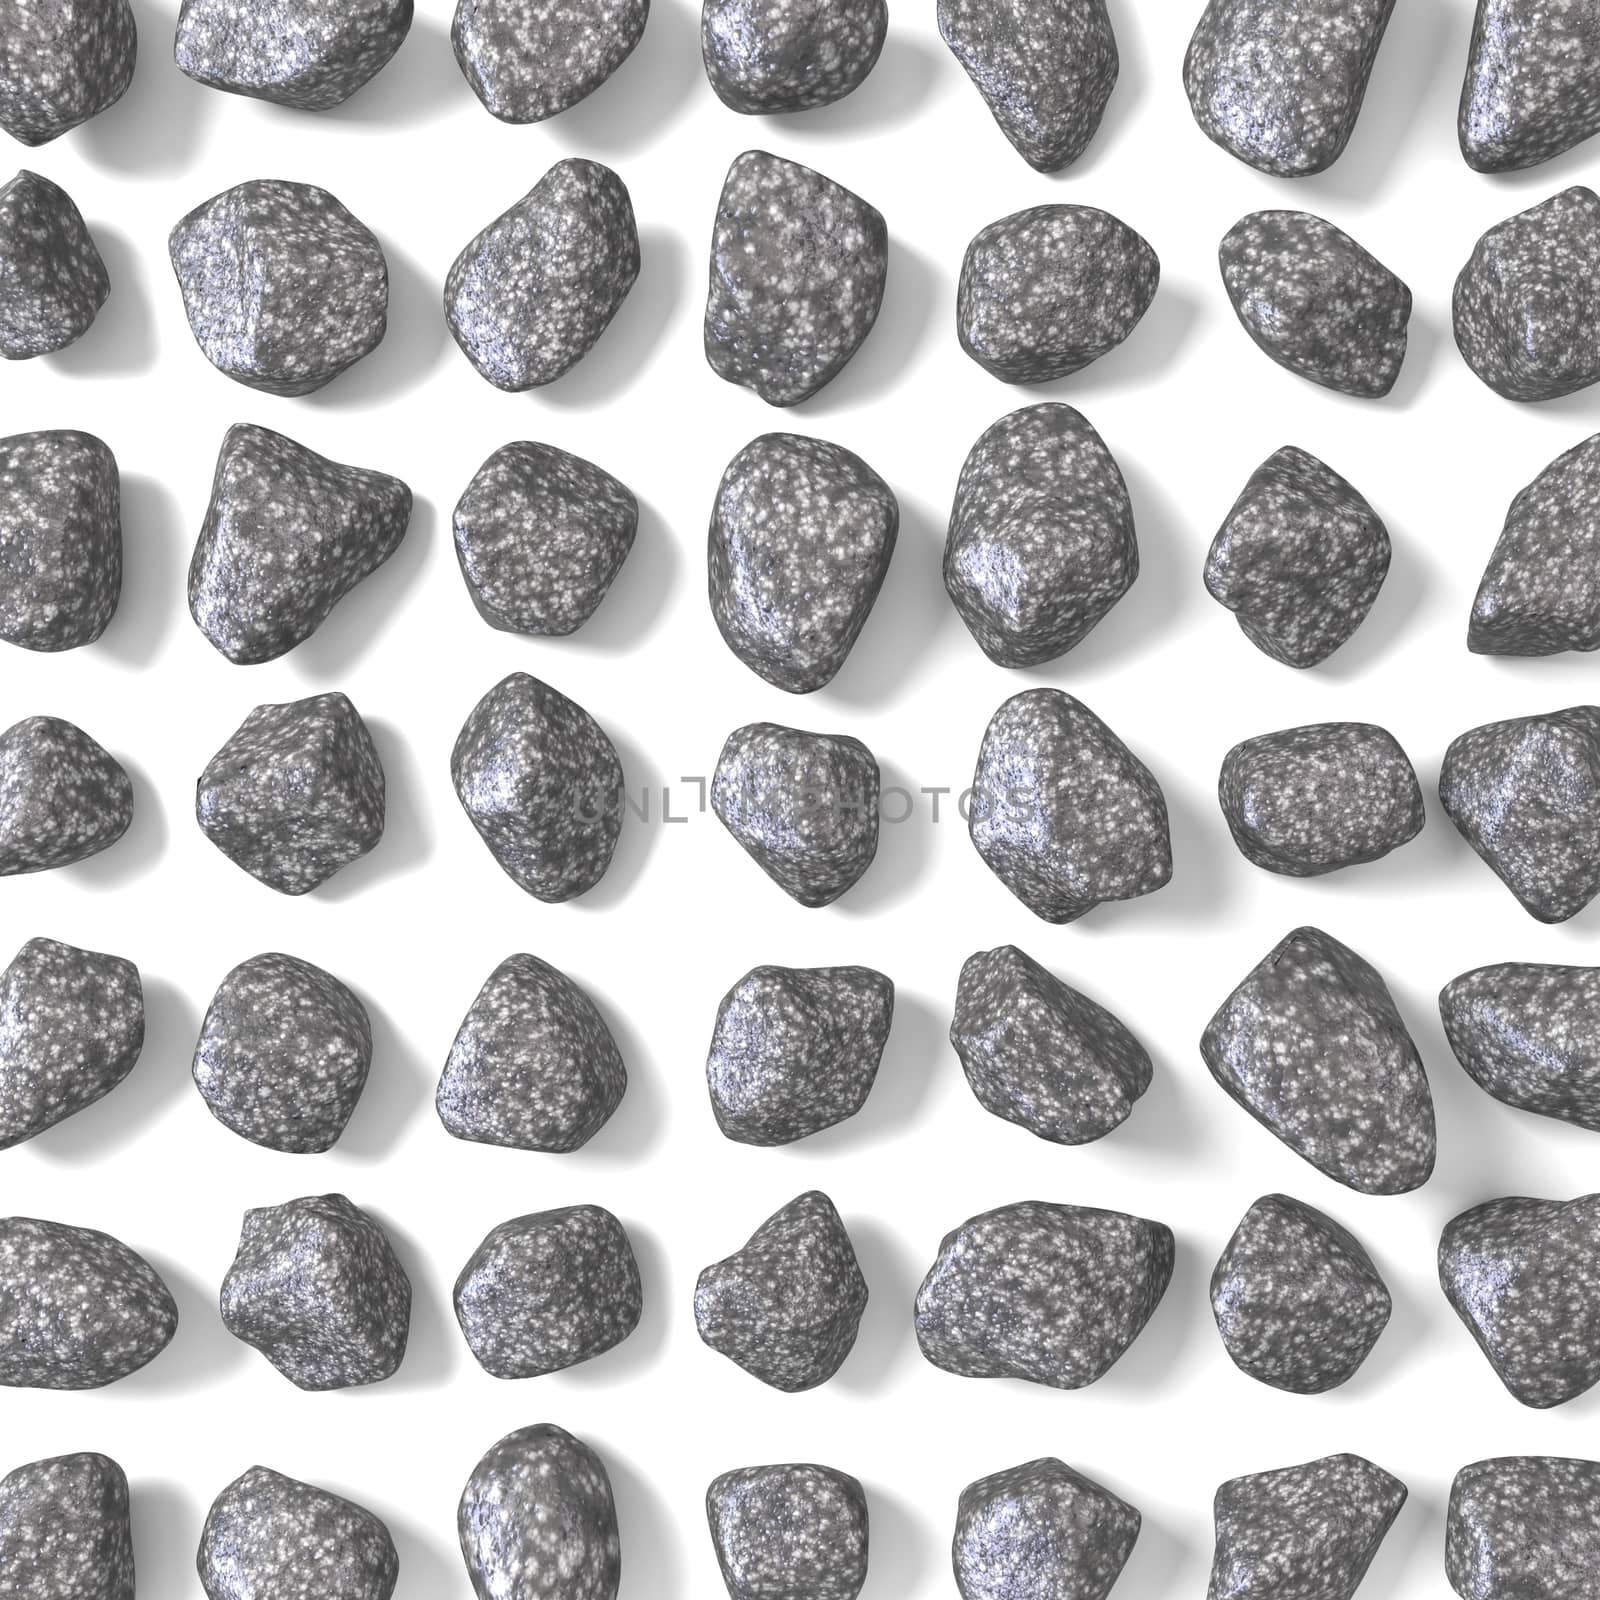 Abstract array made of rocks 3D render illustration isolated on white background